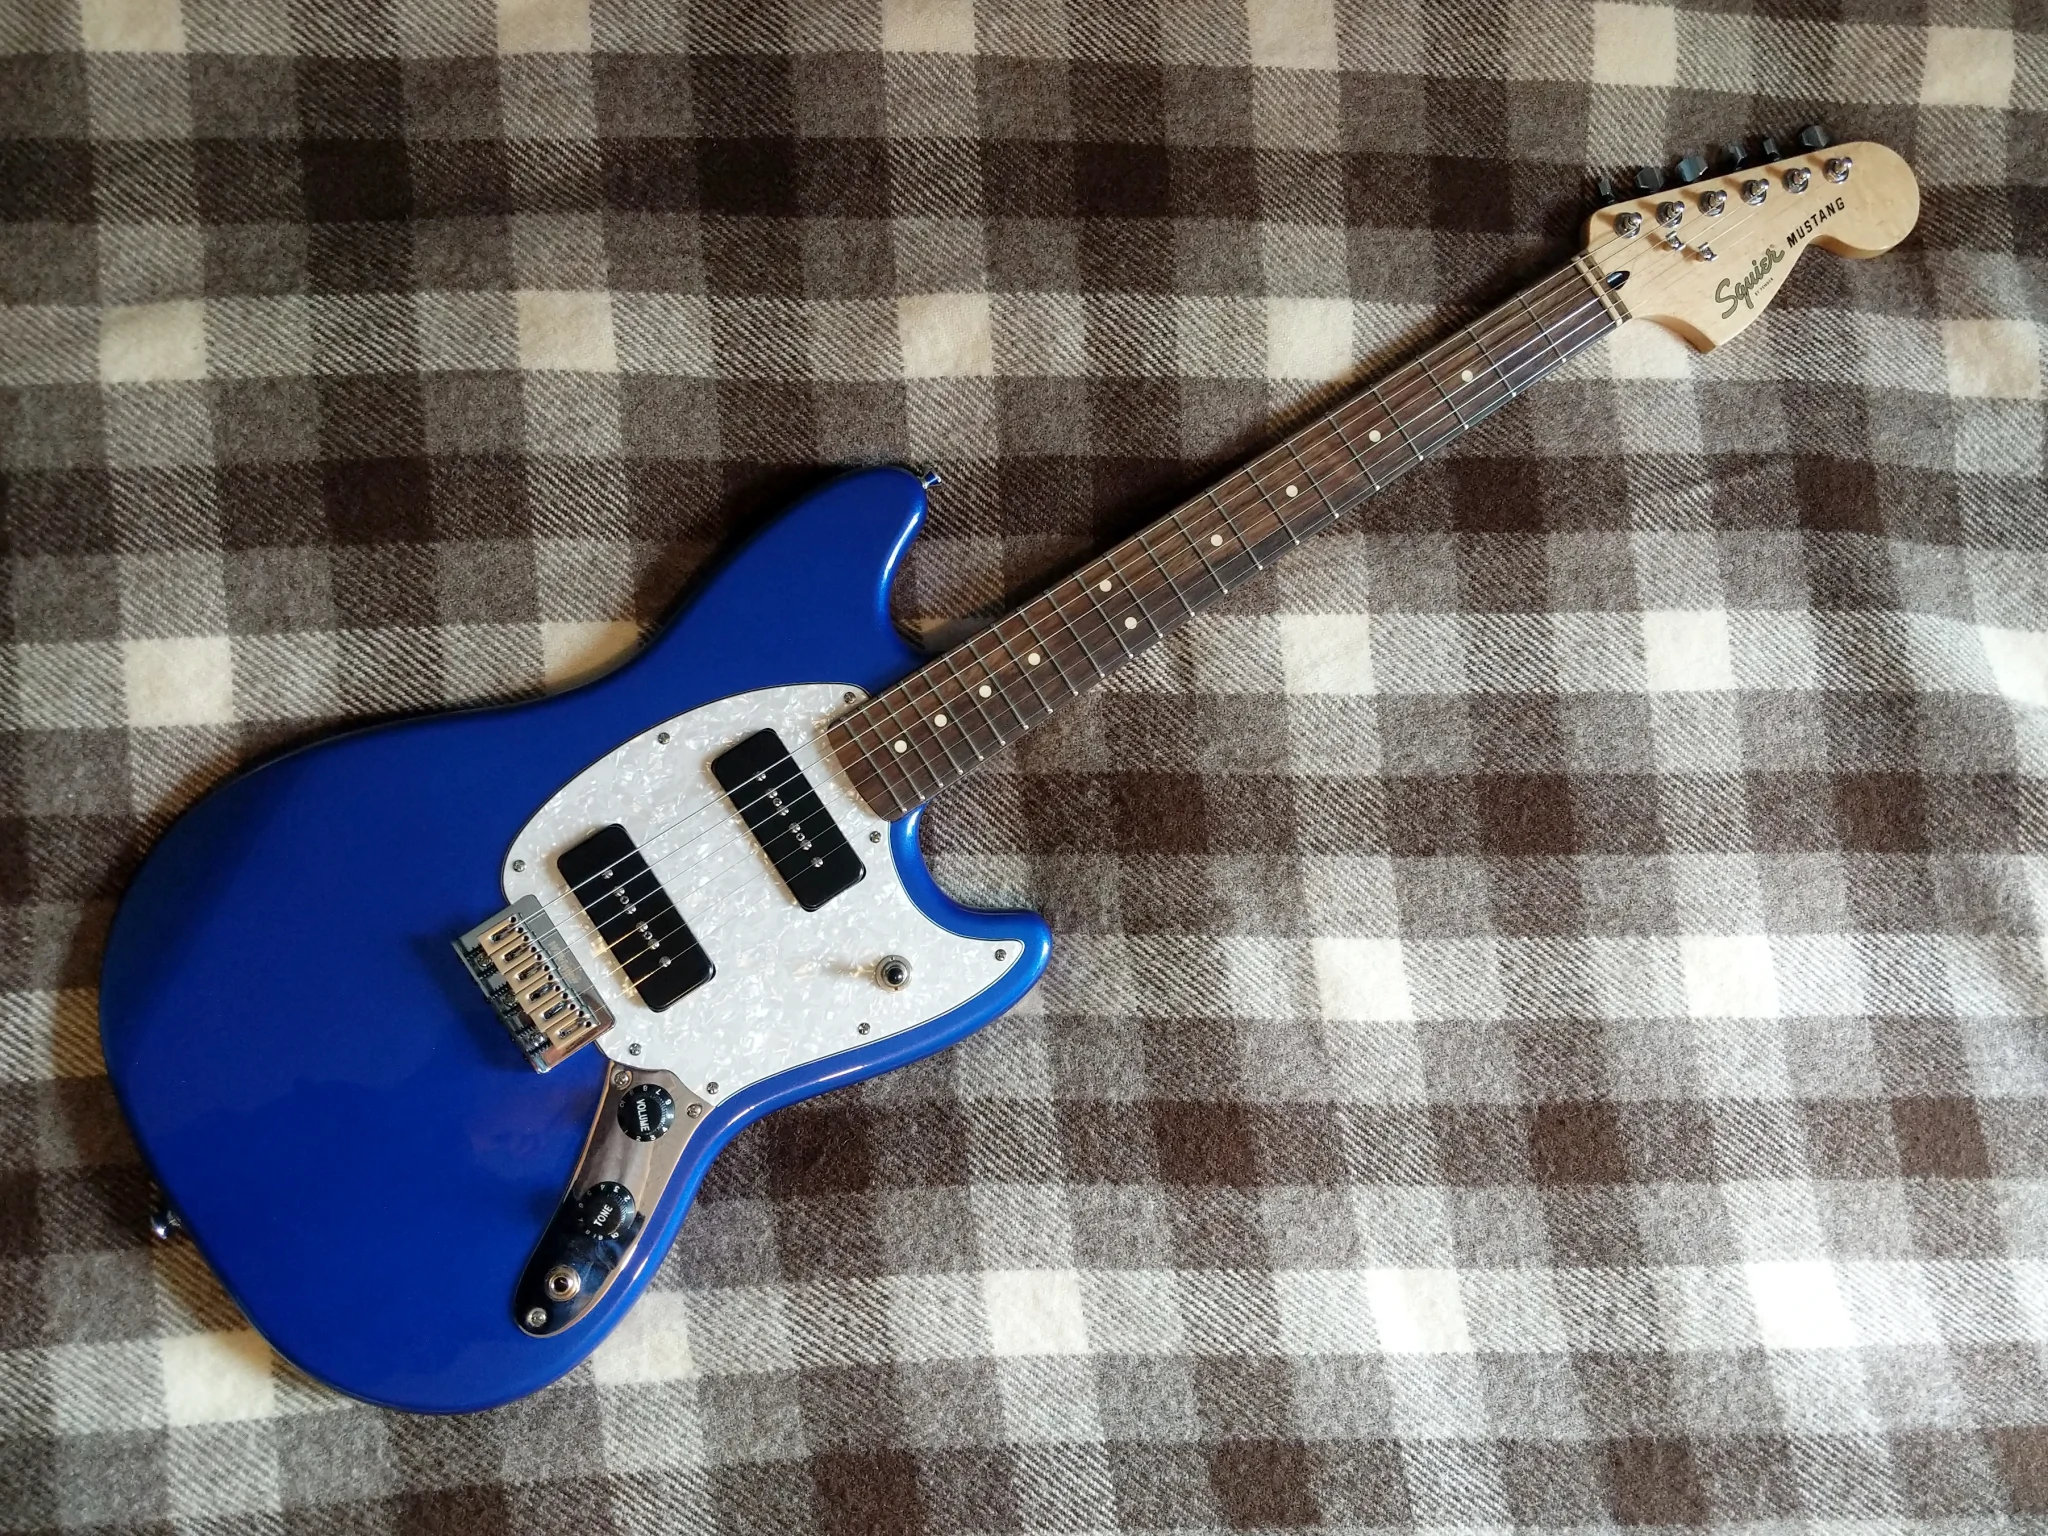 A Squier Mustang guitar on a blanket. It has P-90 pickups and a
pearlescent pickguard